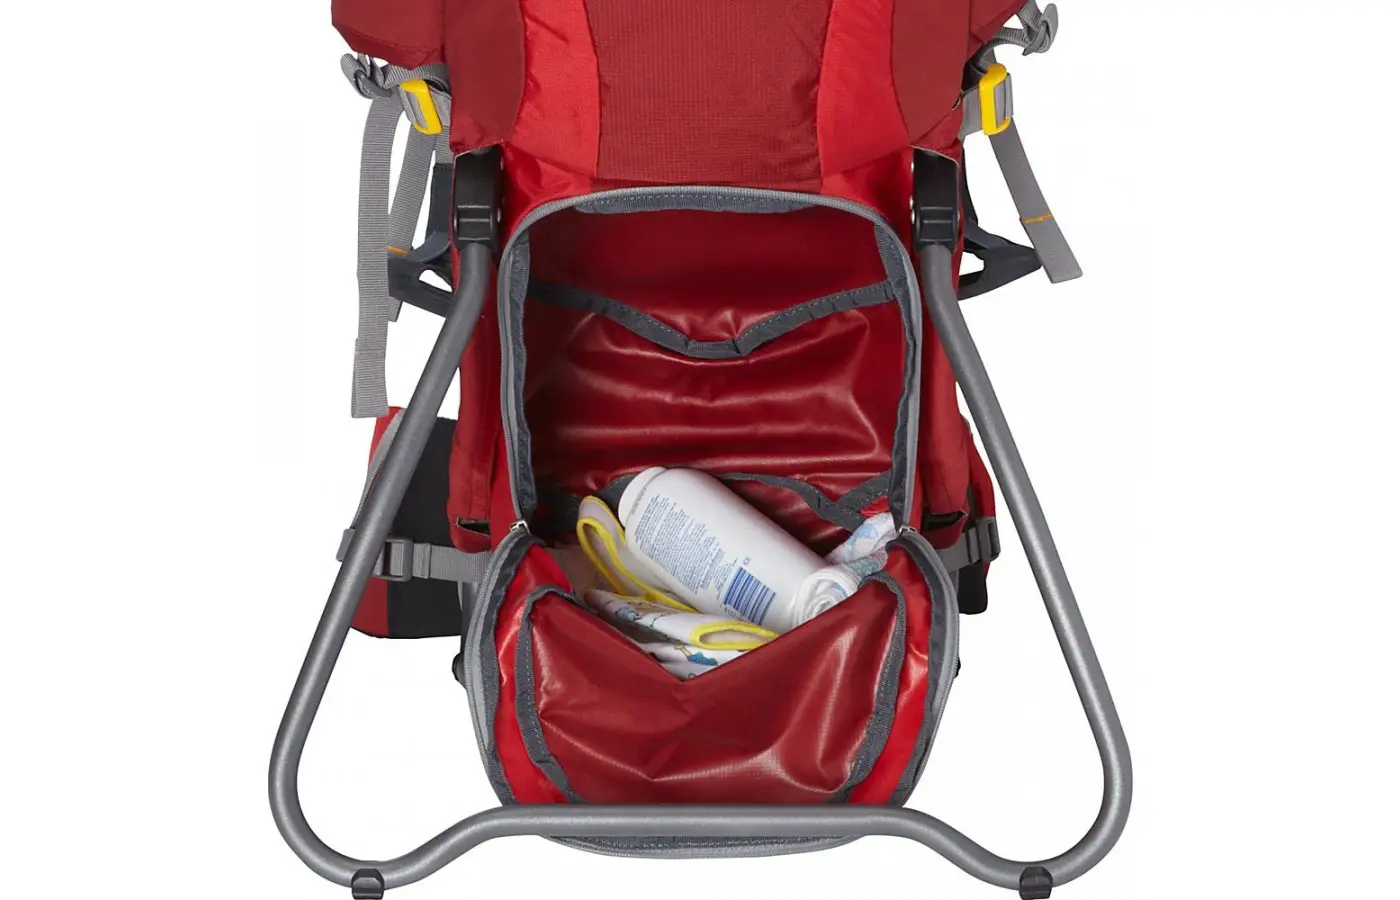 The Deuter Kid Comfort II offers decent sized pockets for protection of valuables.